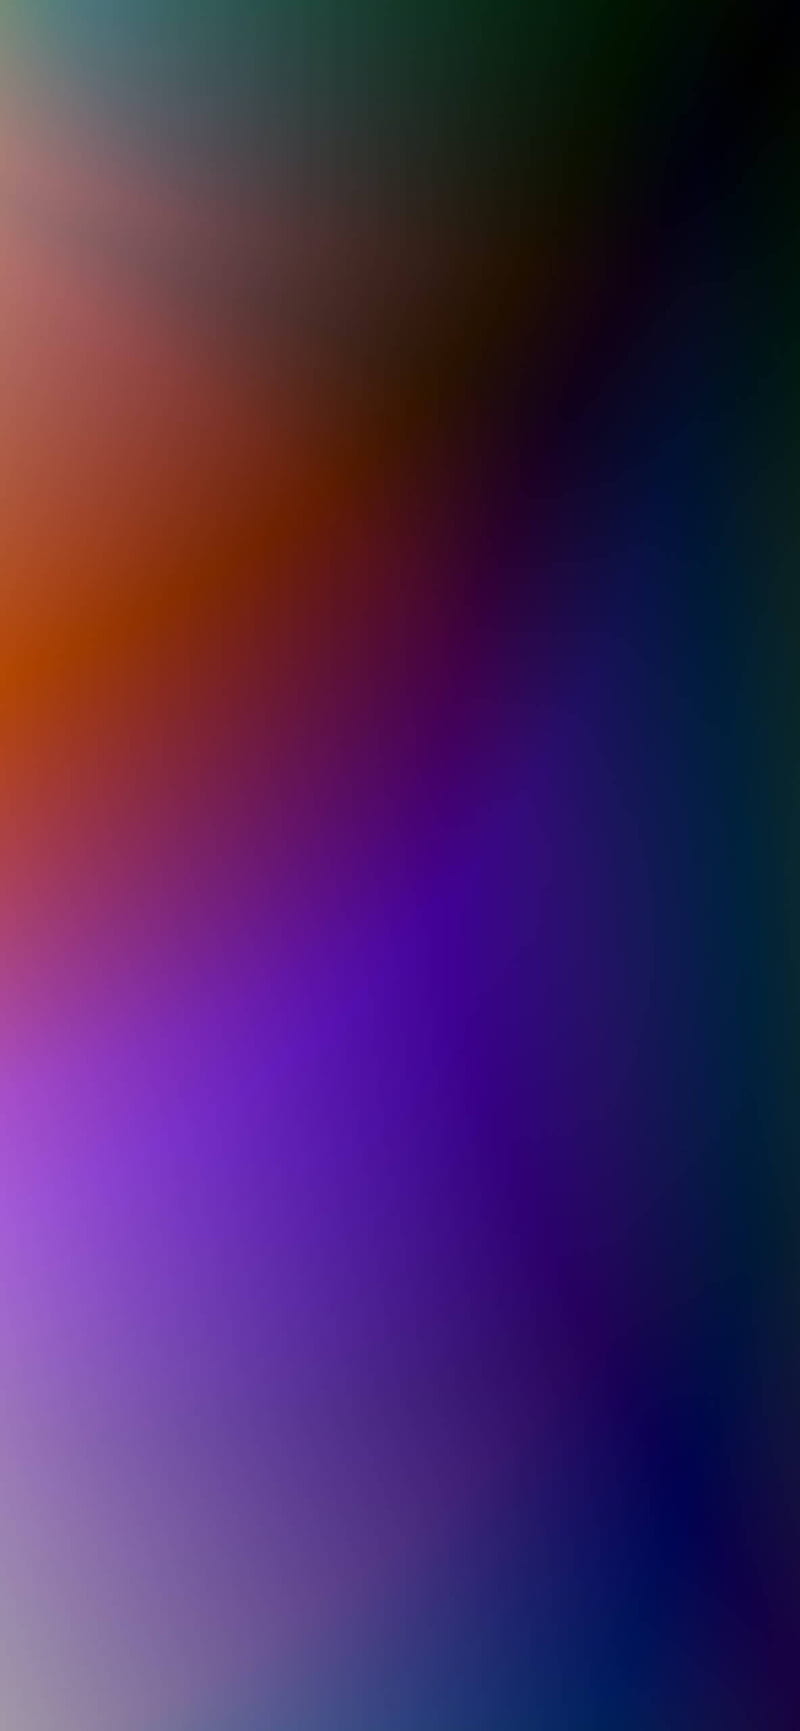 Gradient Colors for iPhone 11, Pro Max, X, 8, 7, 6 - on 3, Gradient, HD phone wallpaper